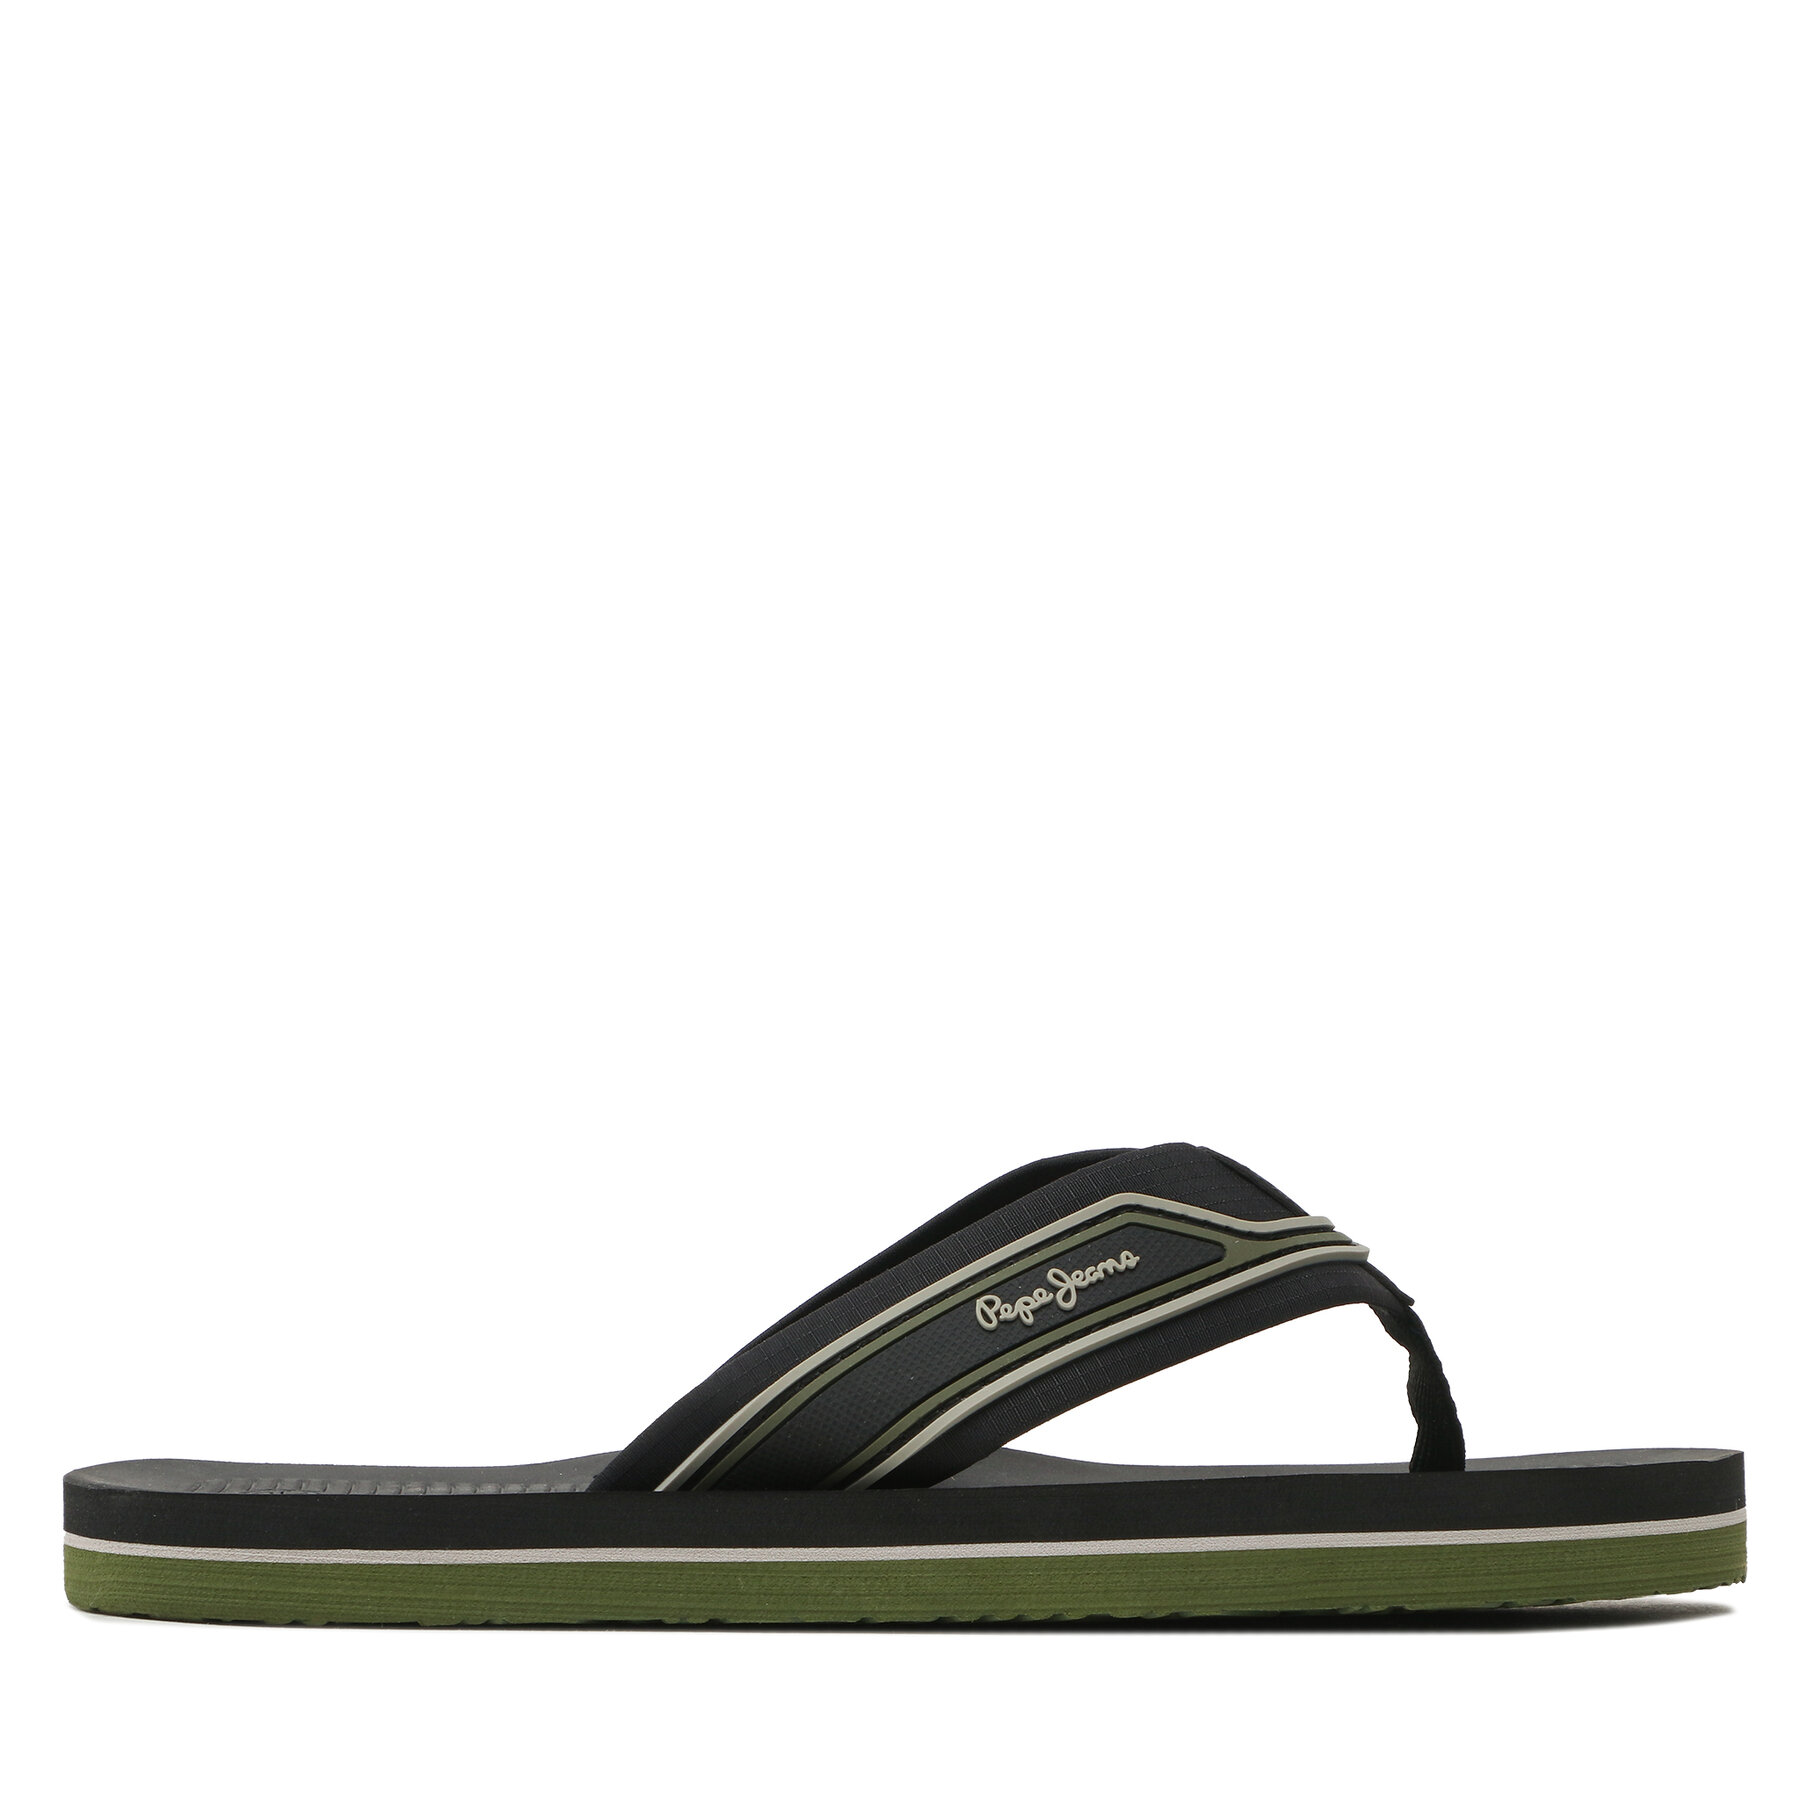 Zehentrenner Pepe Jeans South Beach 2.0 PMS70126 Black 999 von Pepe Jeans